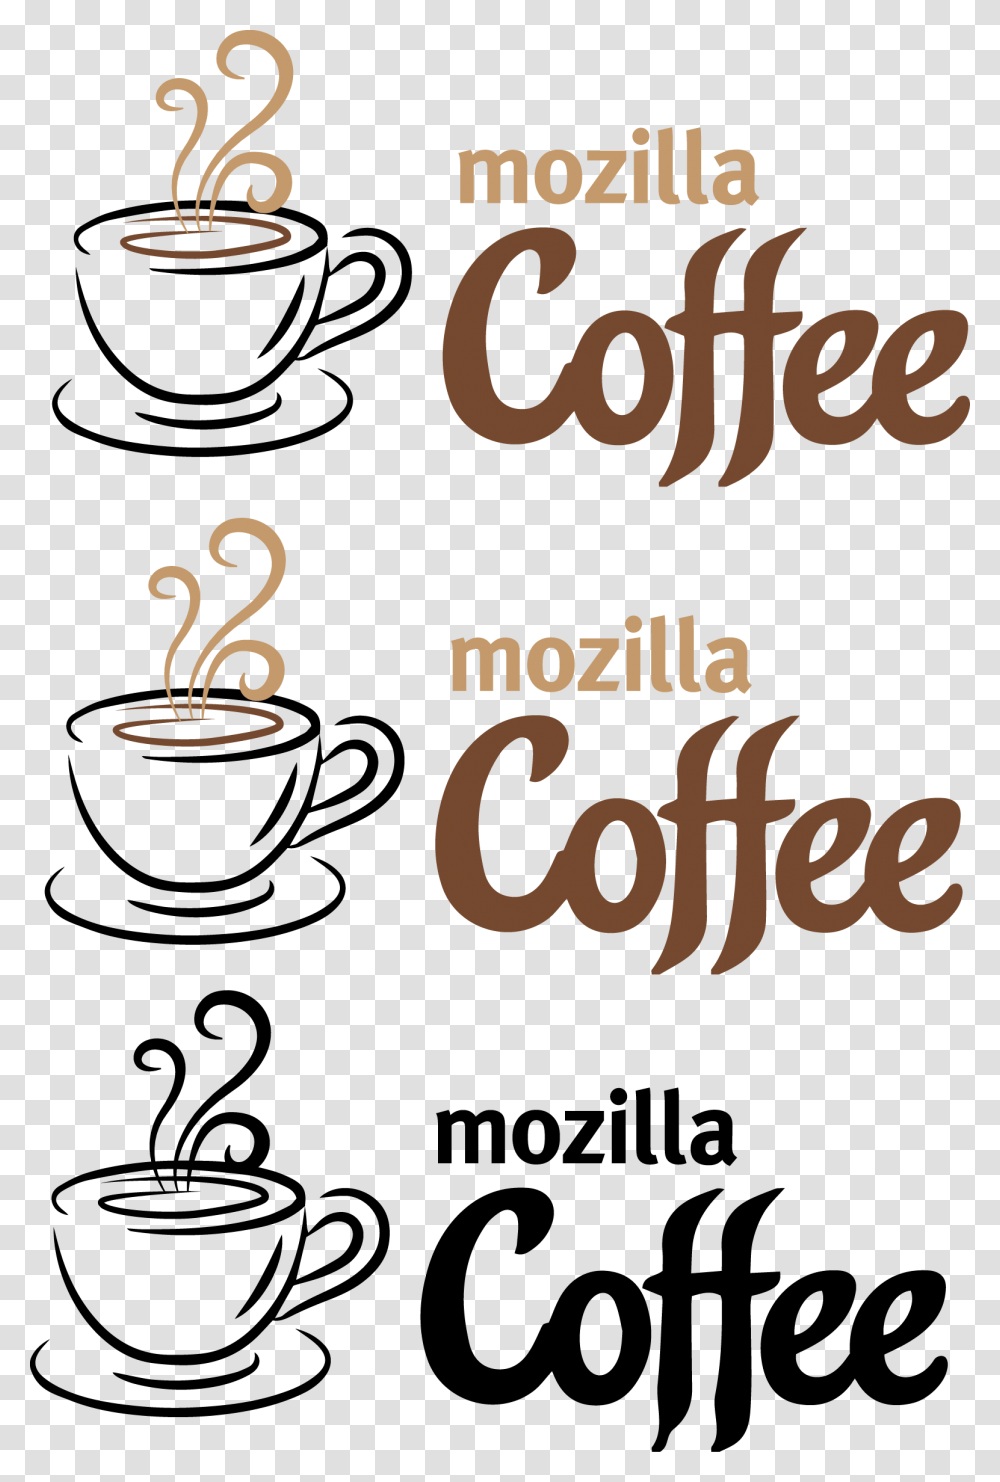 Logo De Cafe Taza Mozilla Firefox, Coffee Cup, Pottery, Saucer Transparent Png